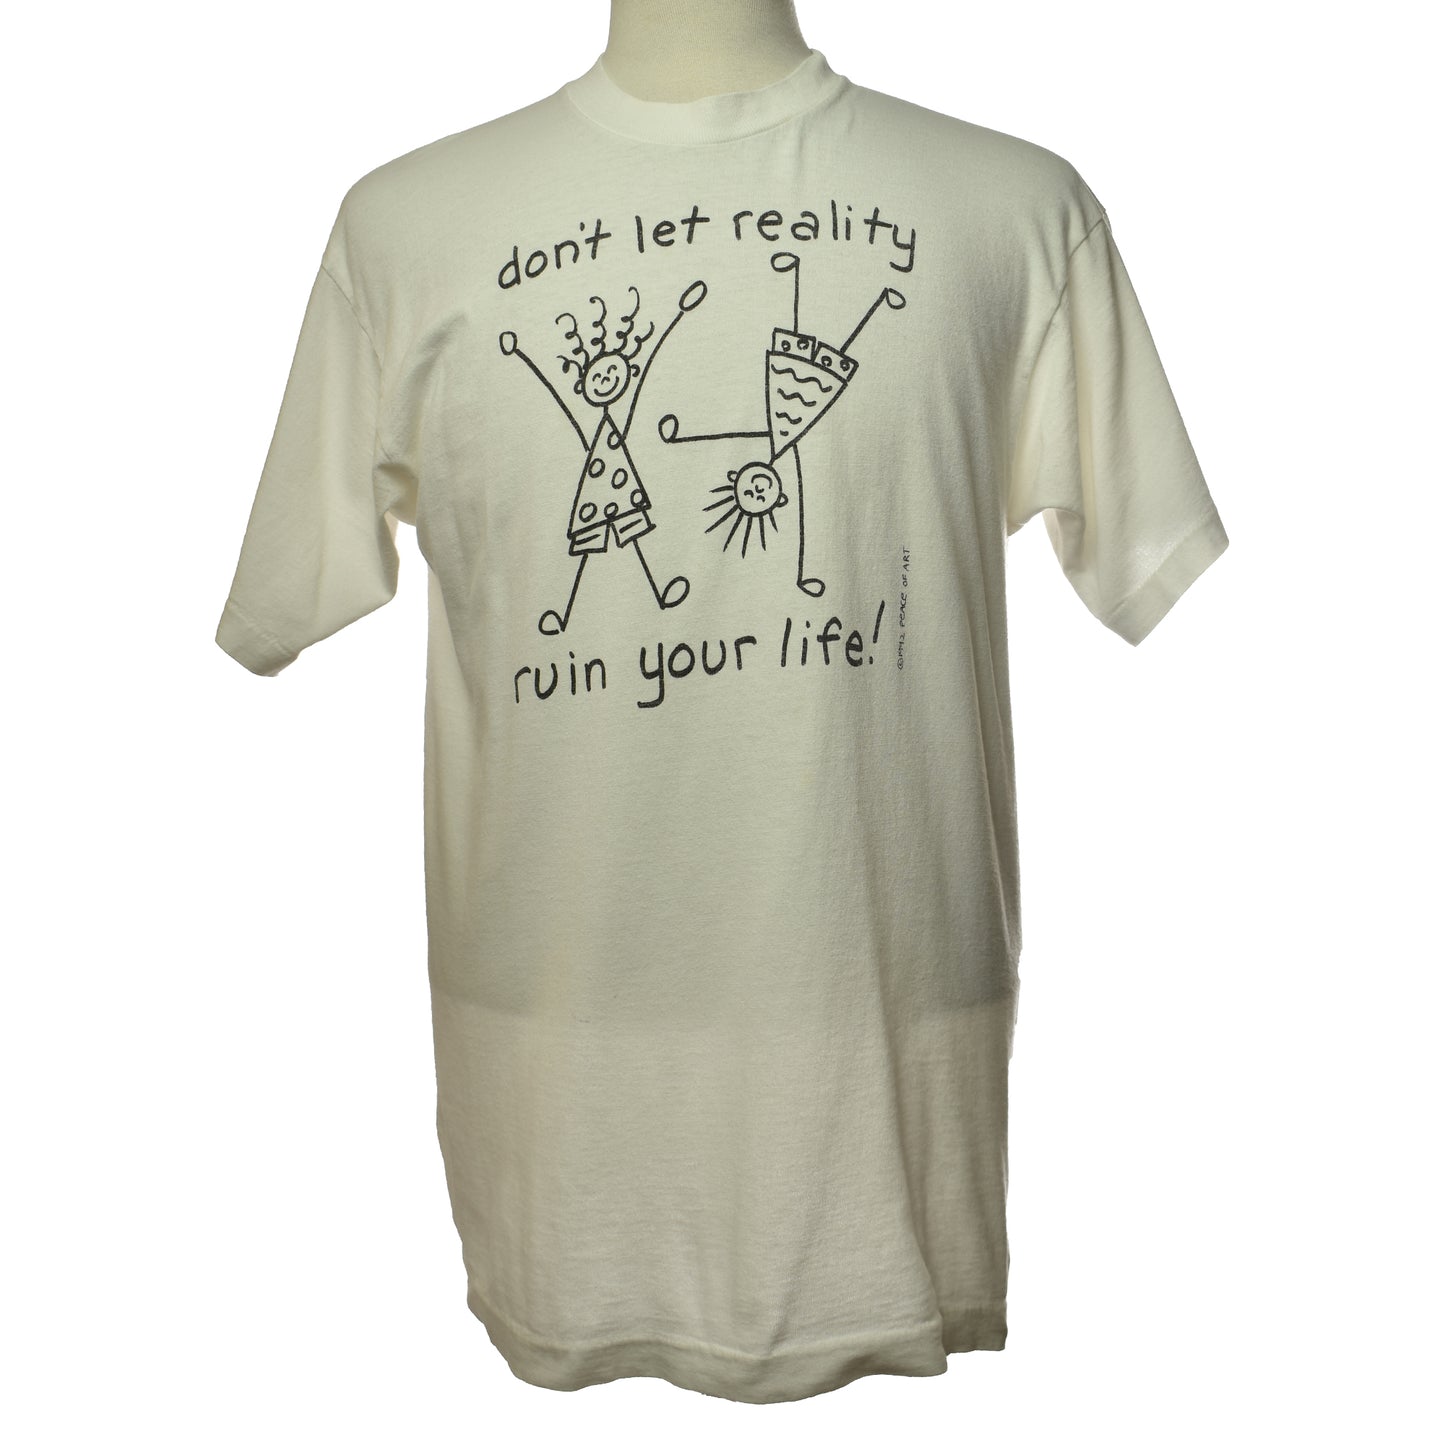 Vintage 1992 Single Stitch Peace of Art "Don't Let Reality Ruin Your Life" Stick Figure Doodle Graphic Fruit of the Loom Tee 100% Cotton Made in USA- Size Large